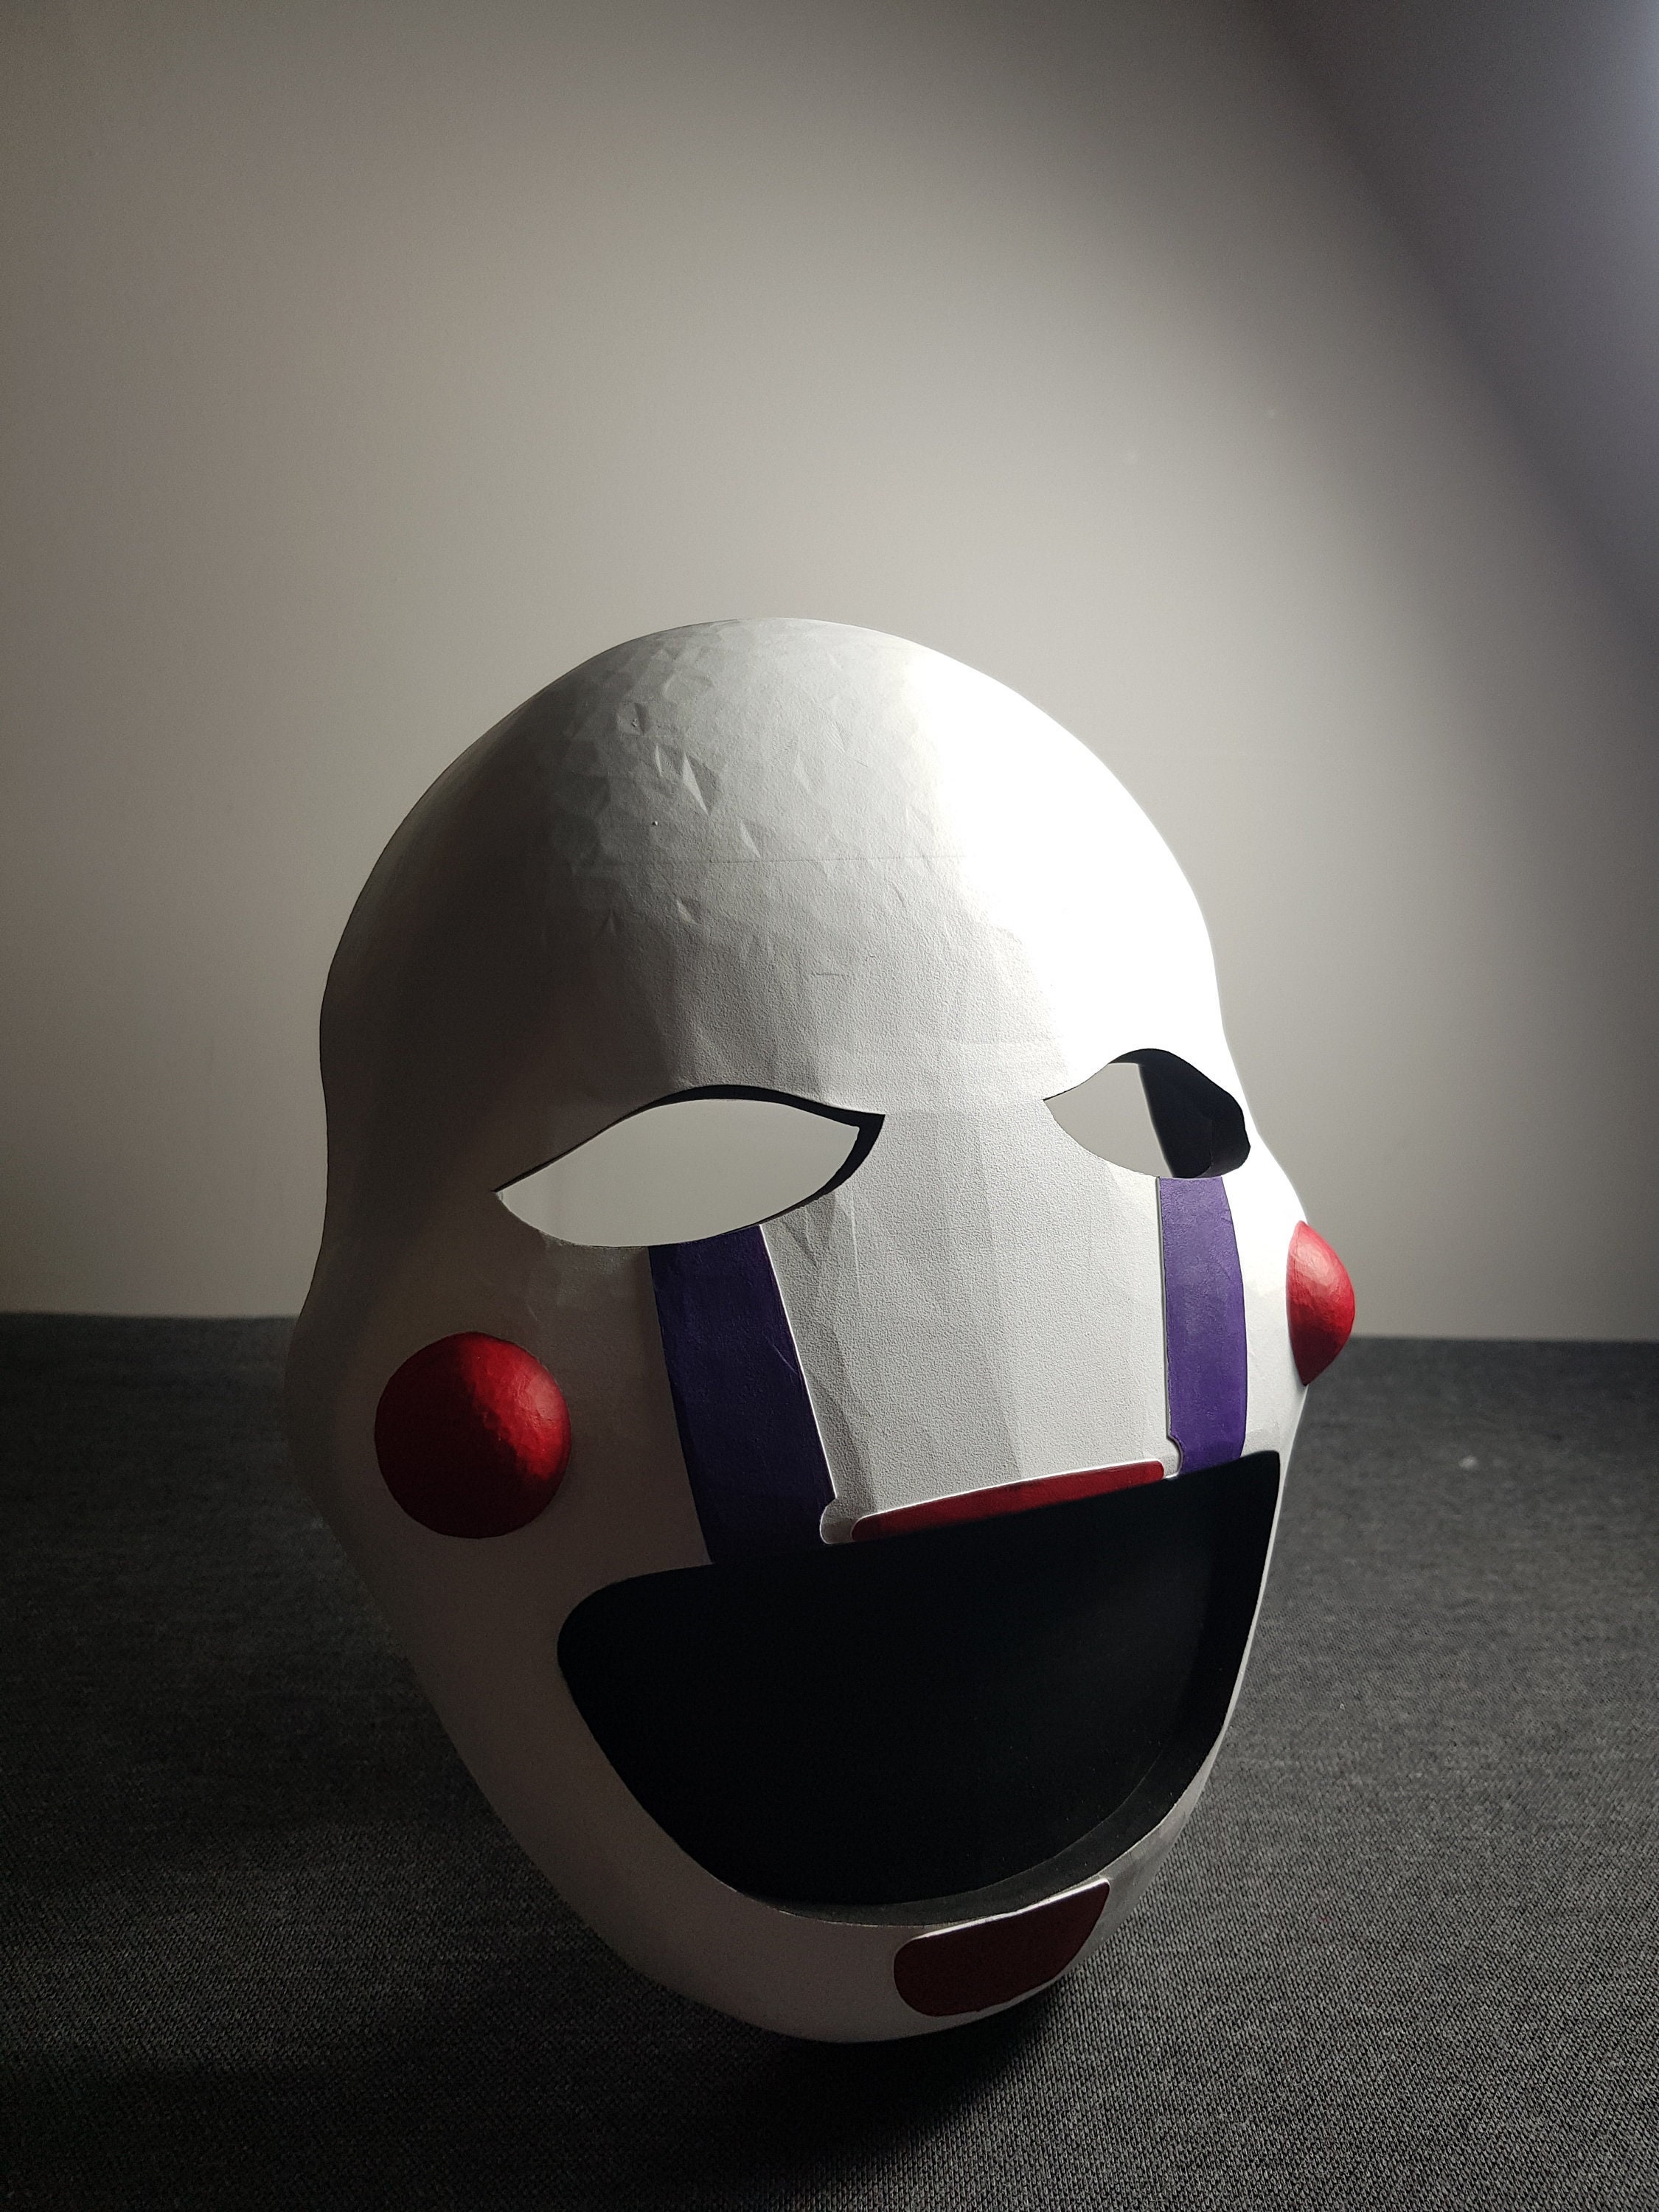 Recently I made a life sized replica of the Puppet mask for a